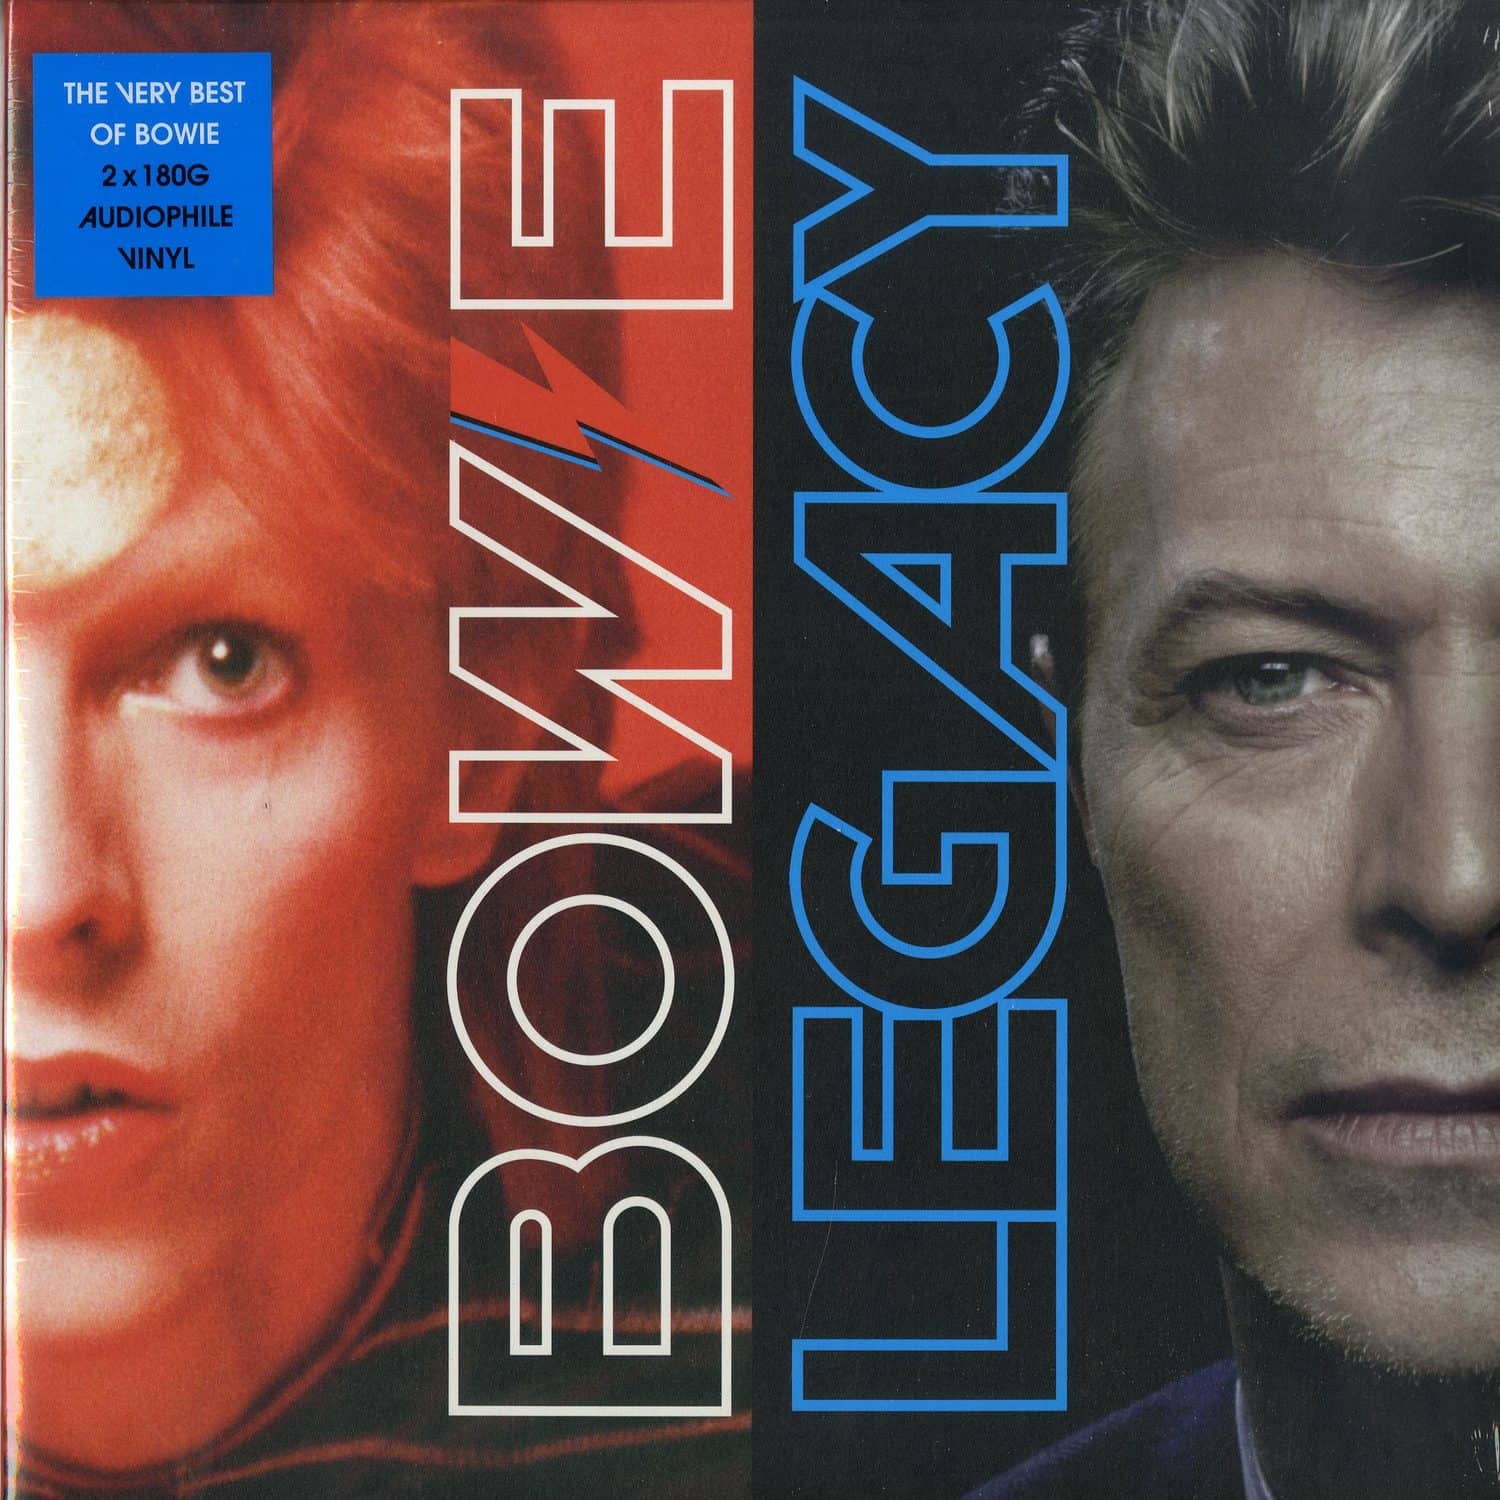 DAVID BOWIE - Legacy - The Very Best Of Bowie - 2LP - 180g Vinyl